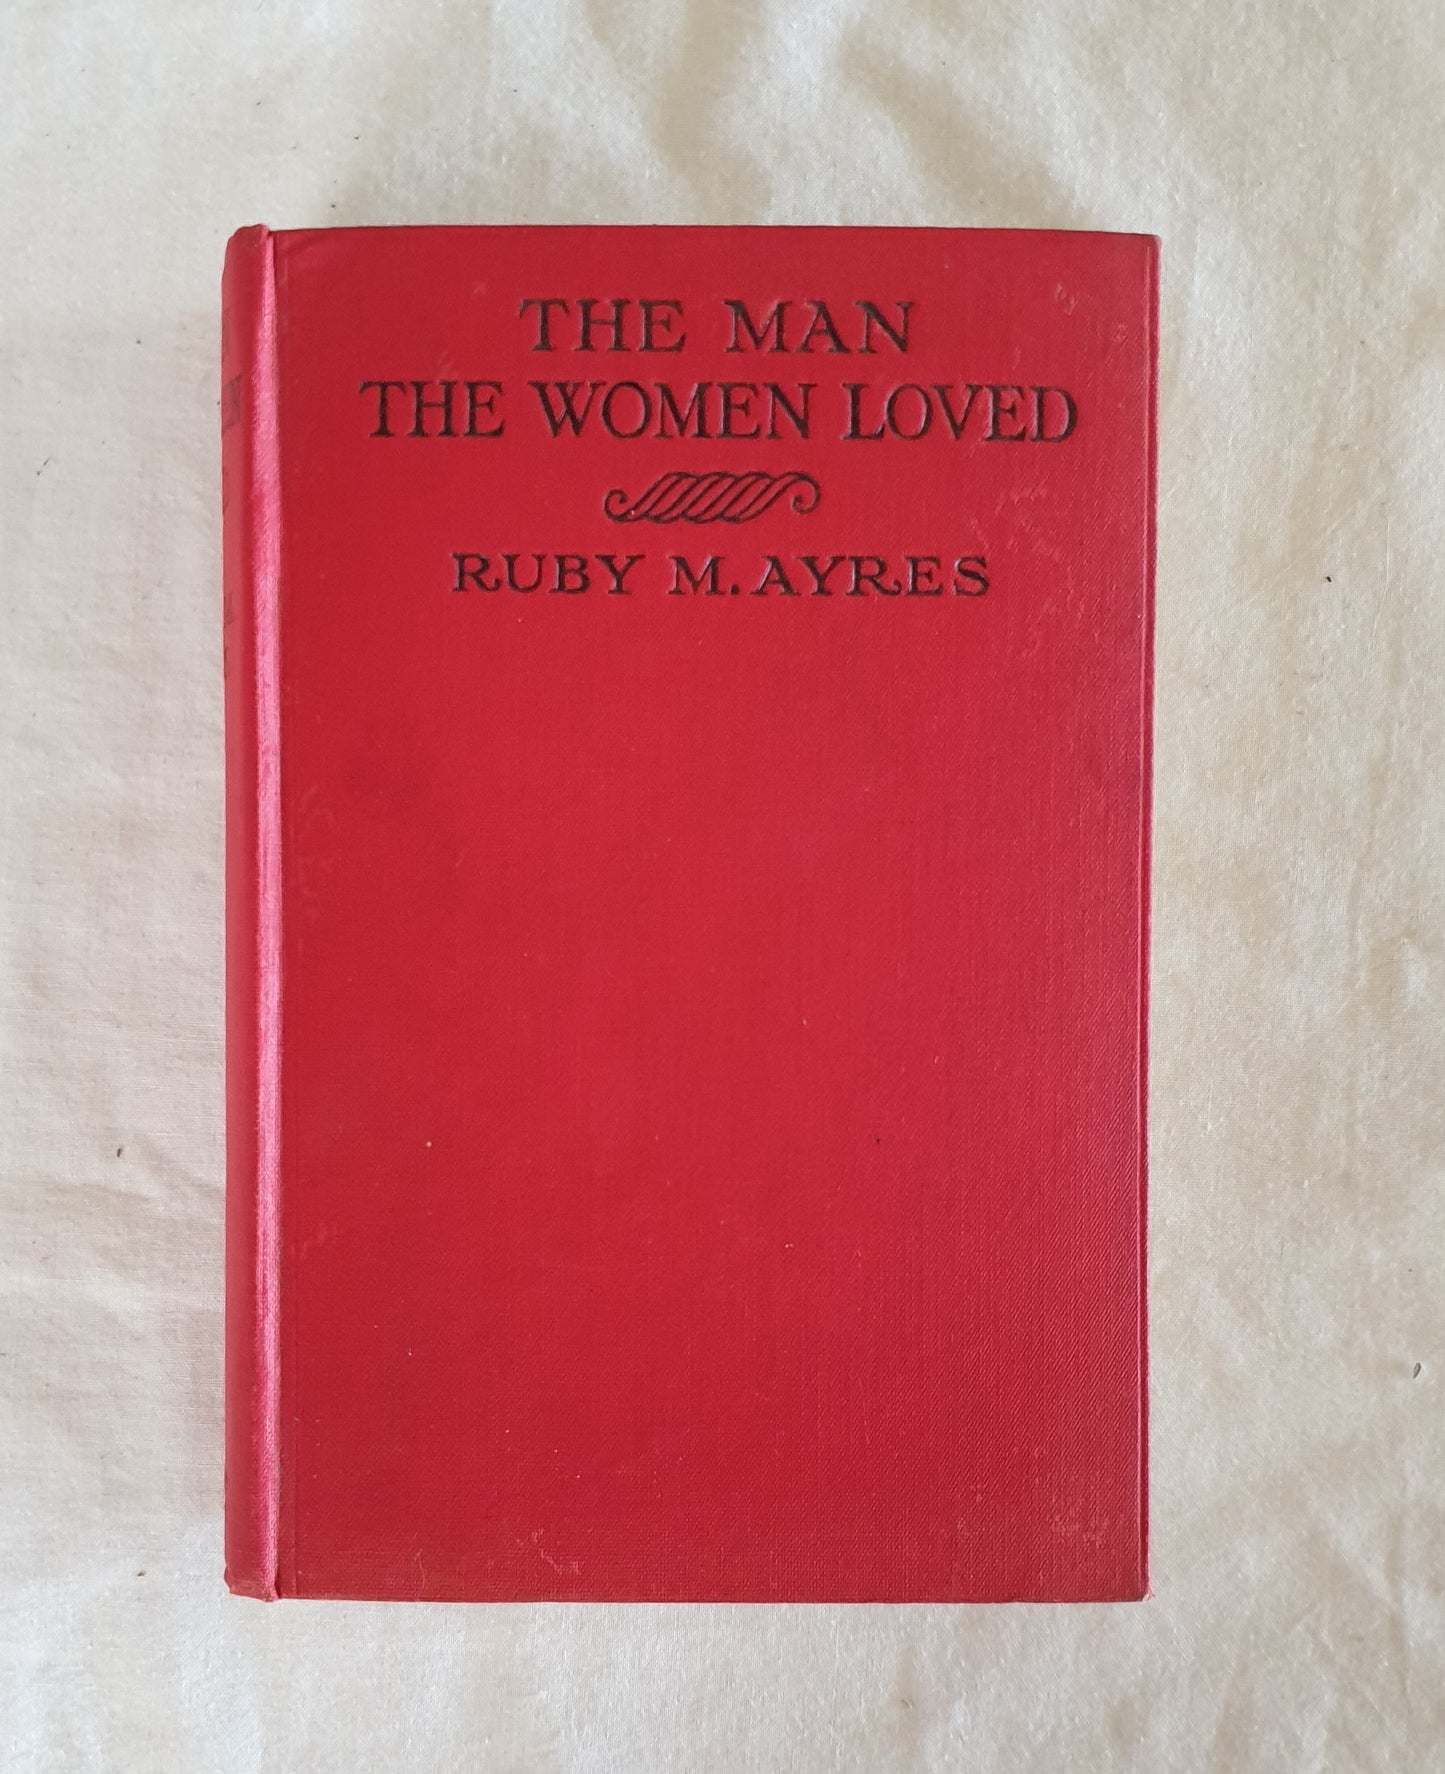 The Man the Women Loved by Ruby M. Ayres